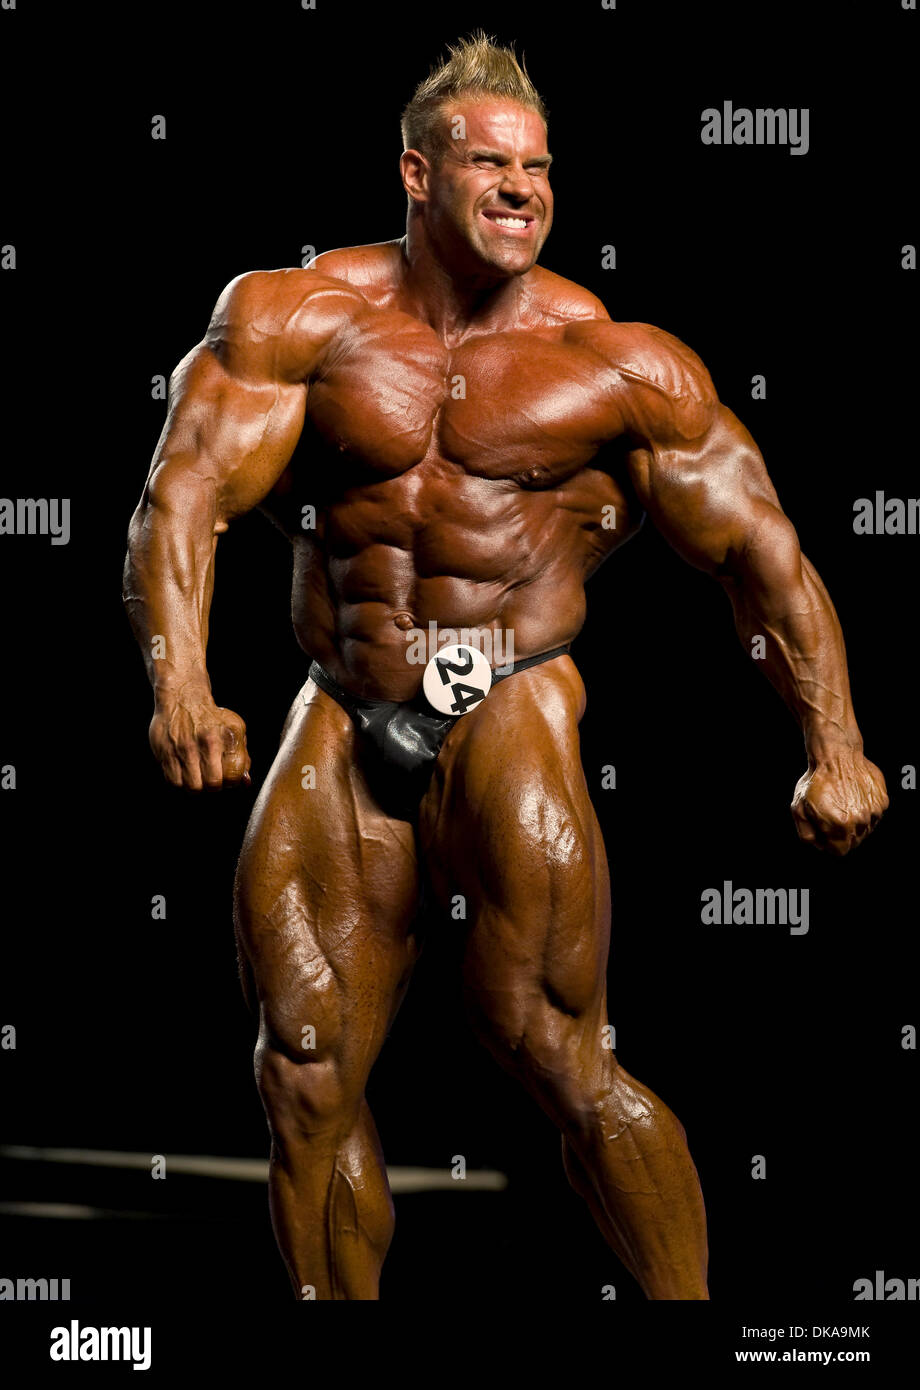 Mr. Olympia Jay Cutler Physique - Celebrity Body Type One (BT1), Male -  Fellow One Research